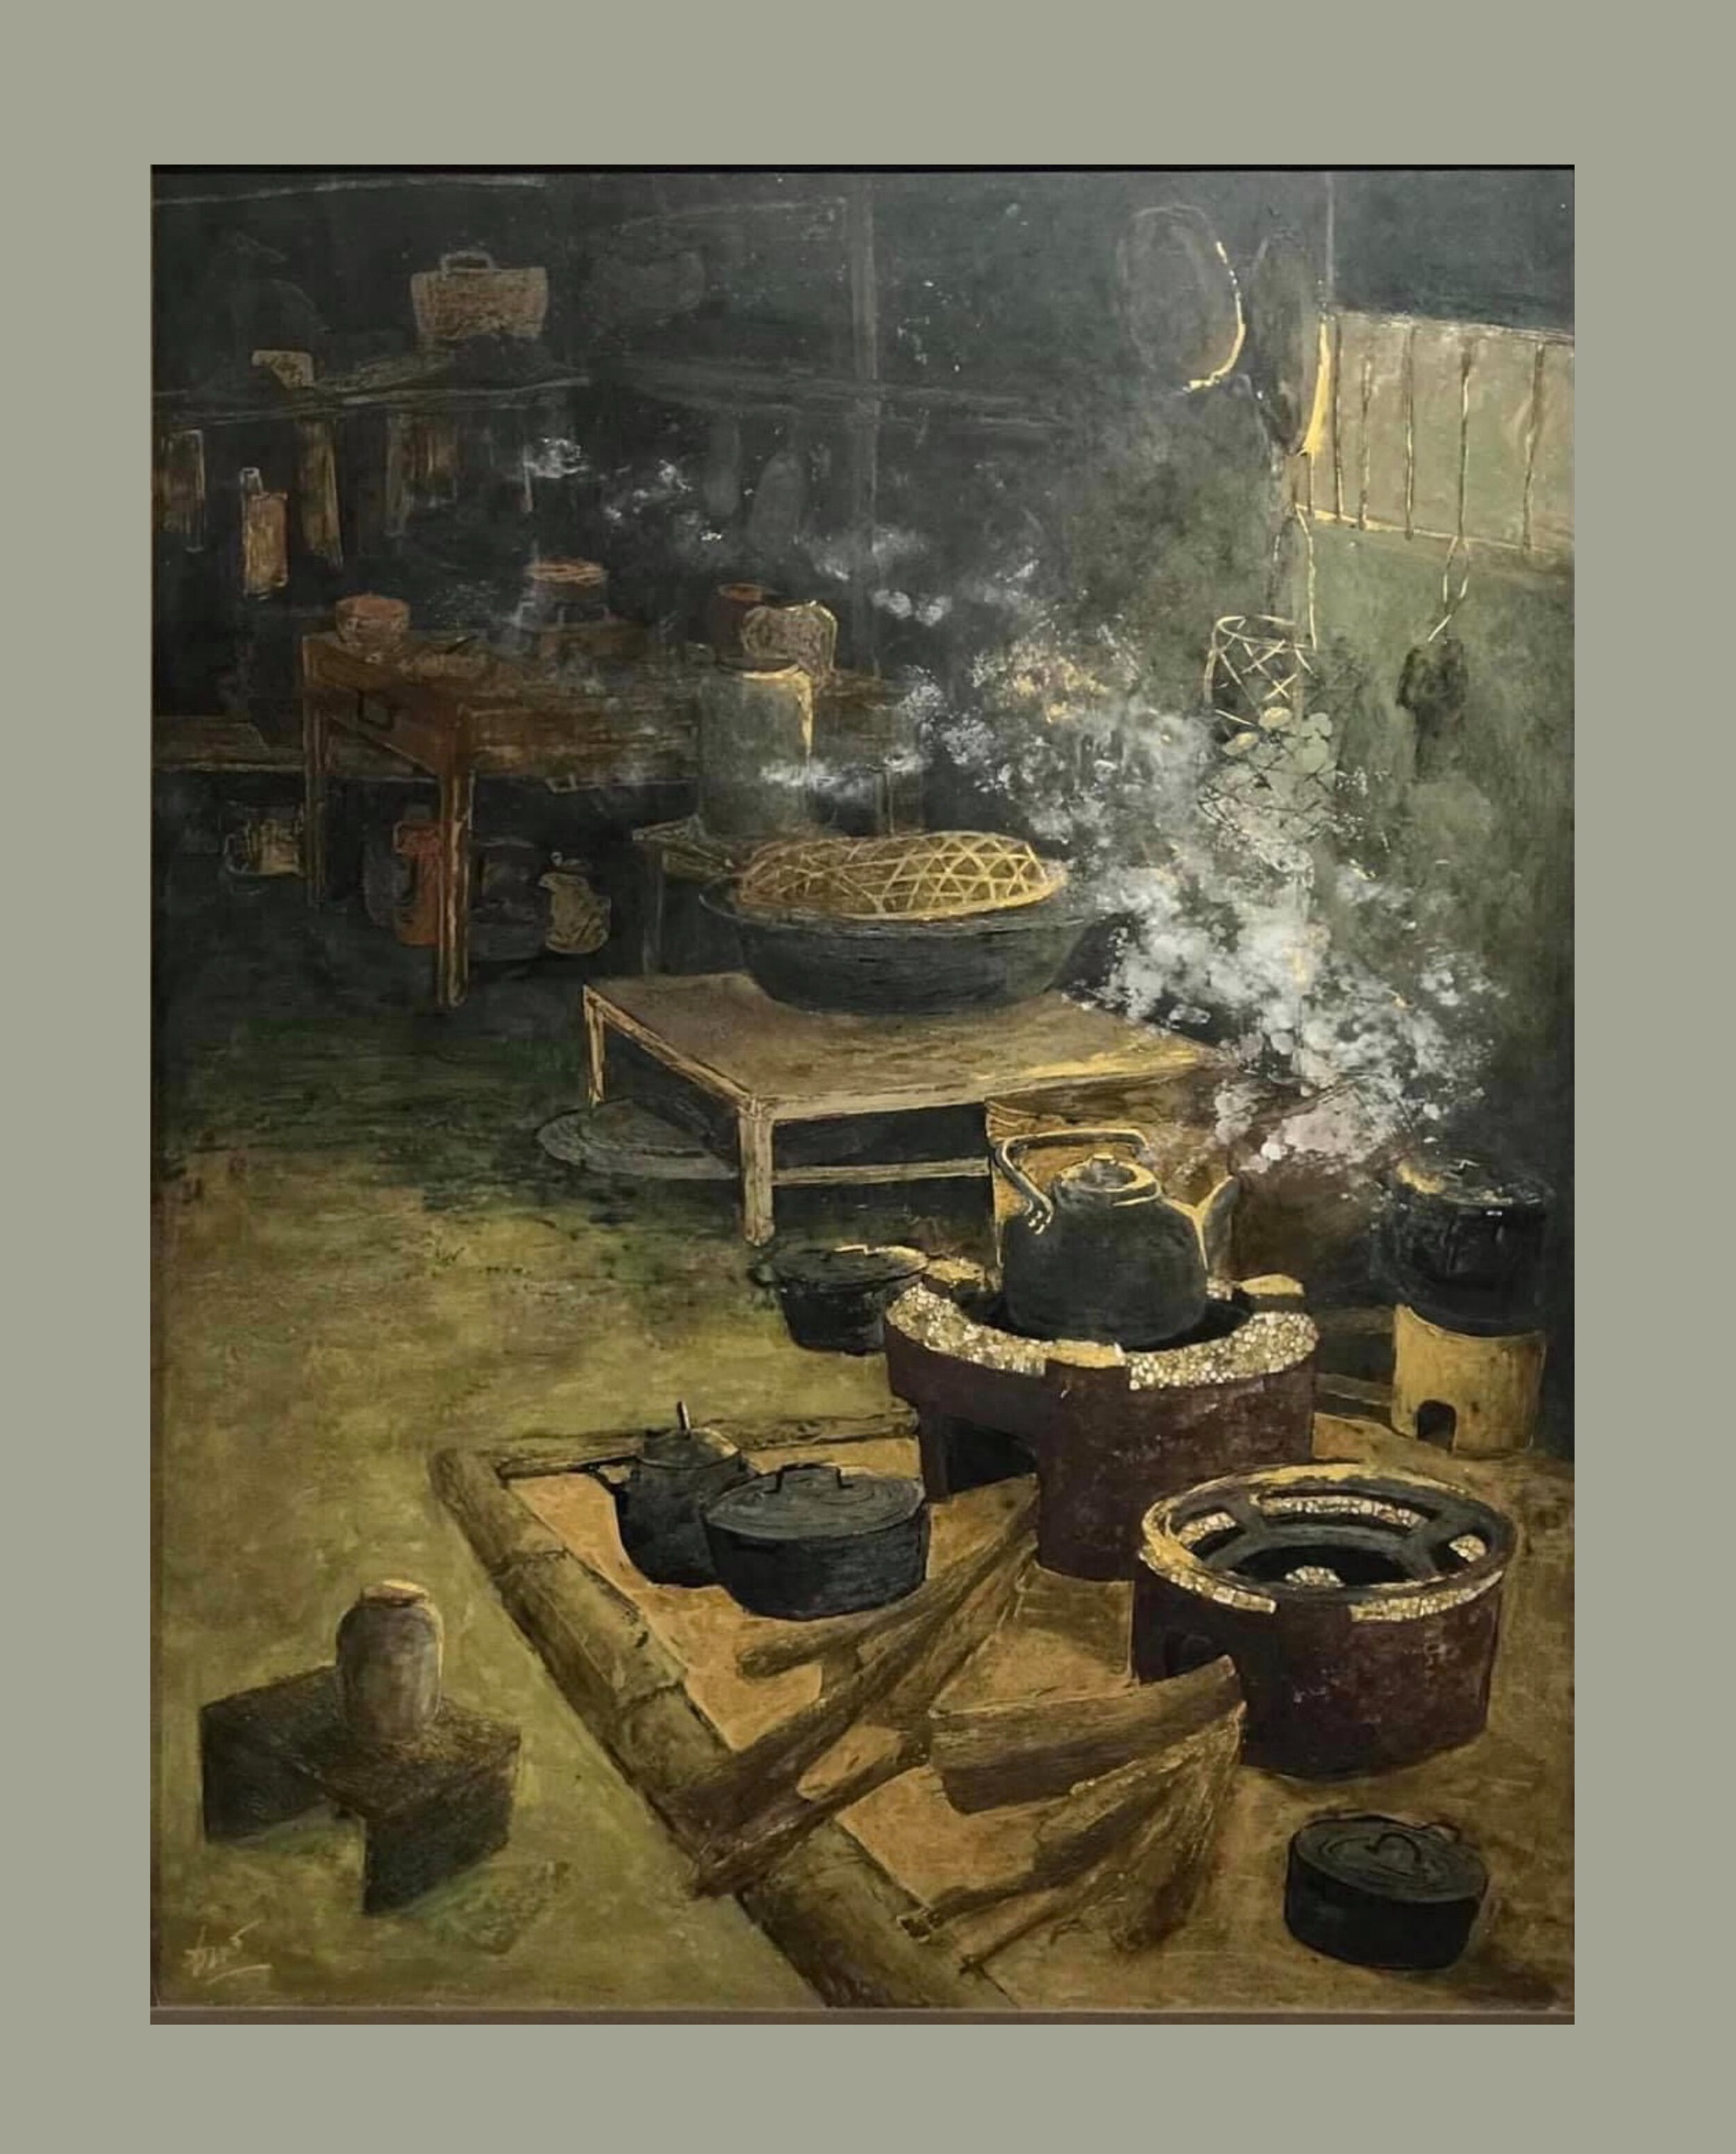 The kitchen of the Nung people